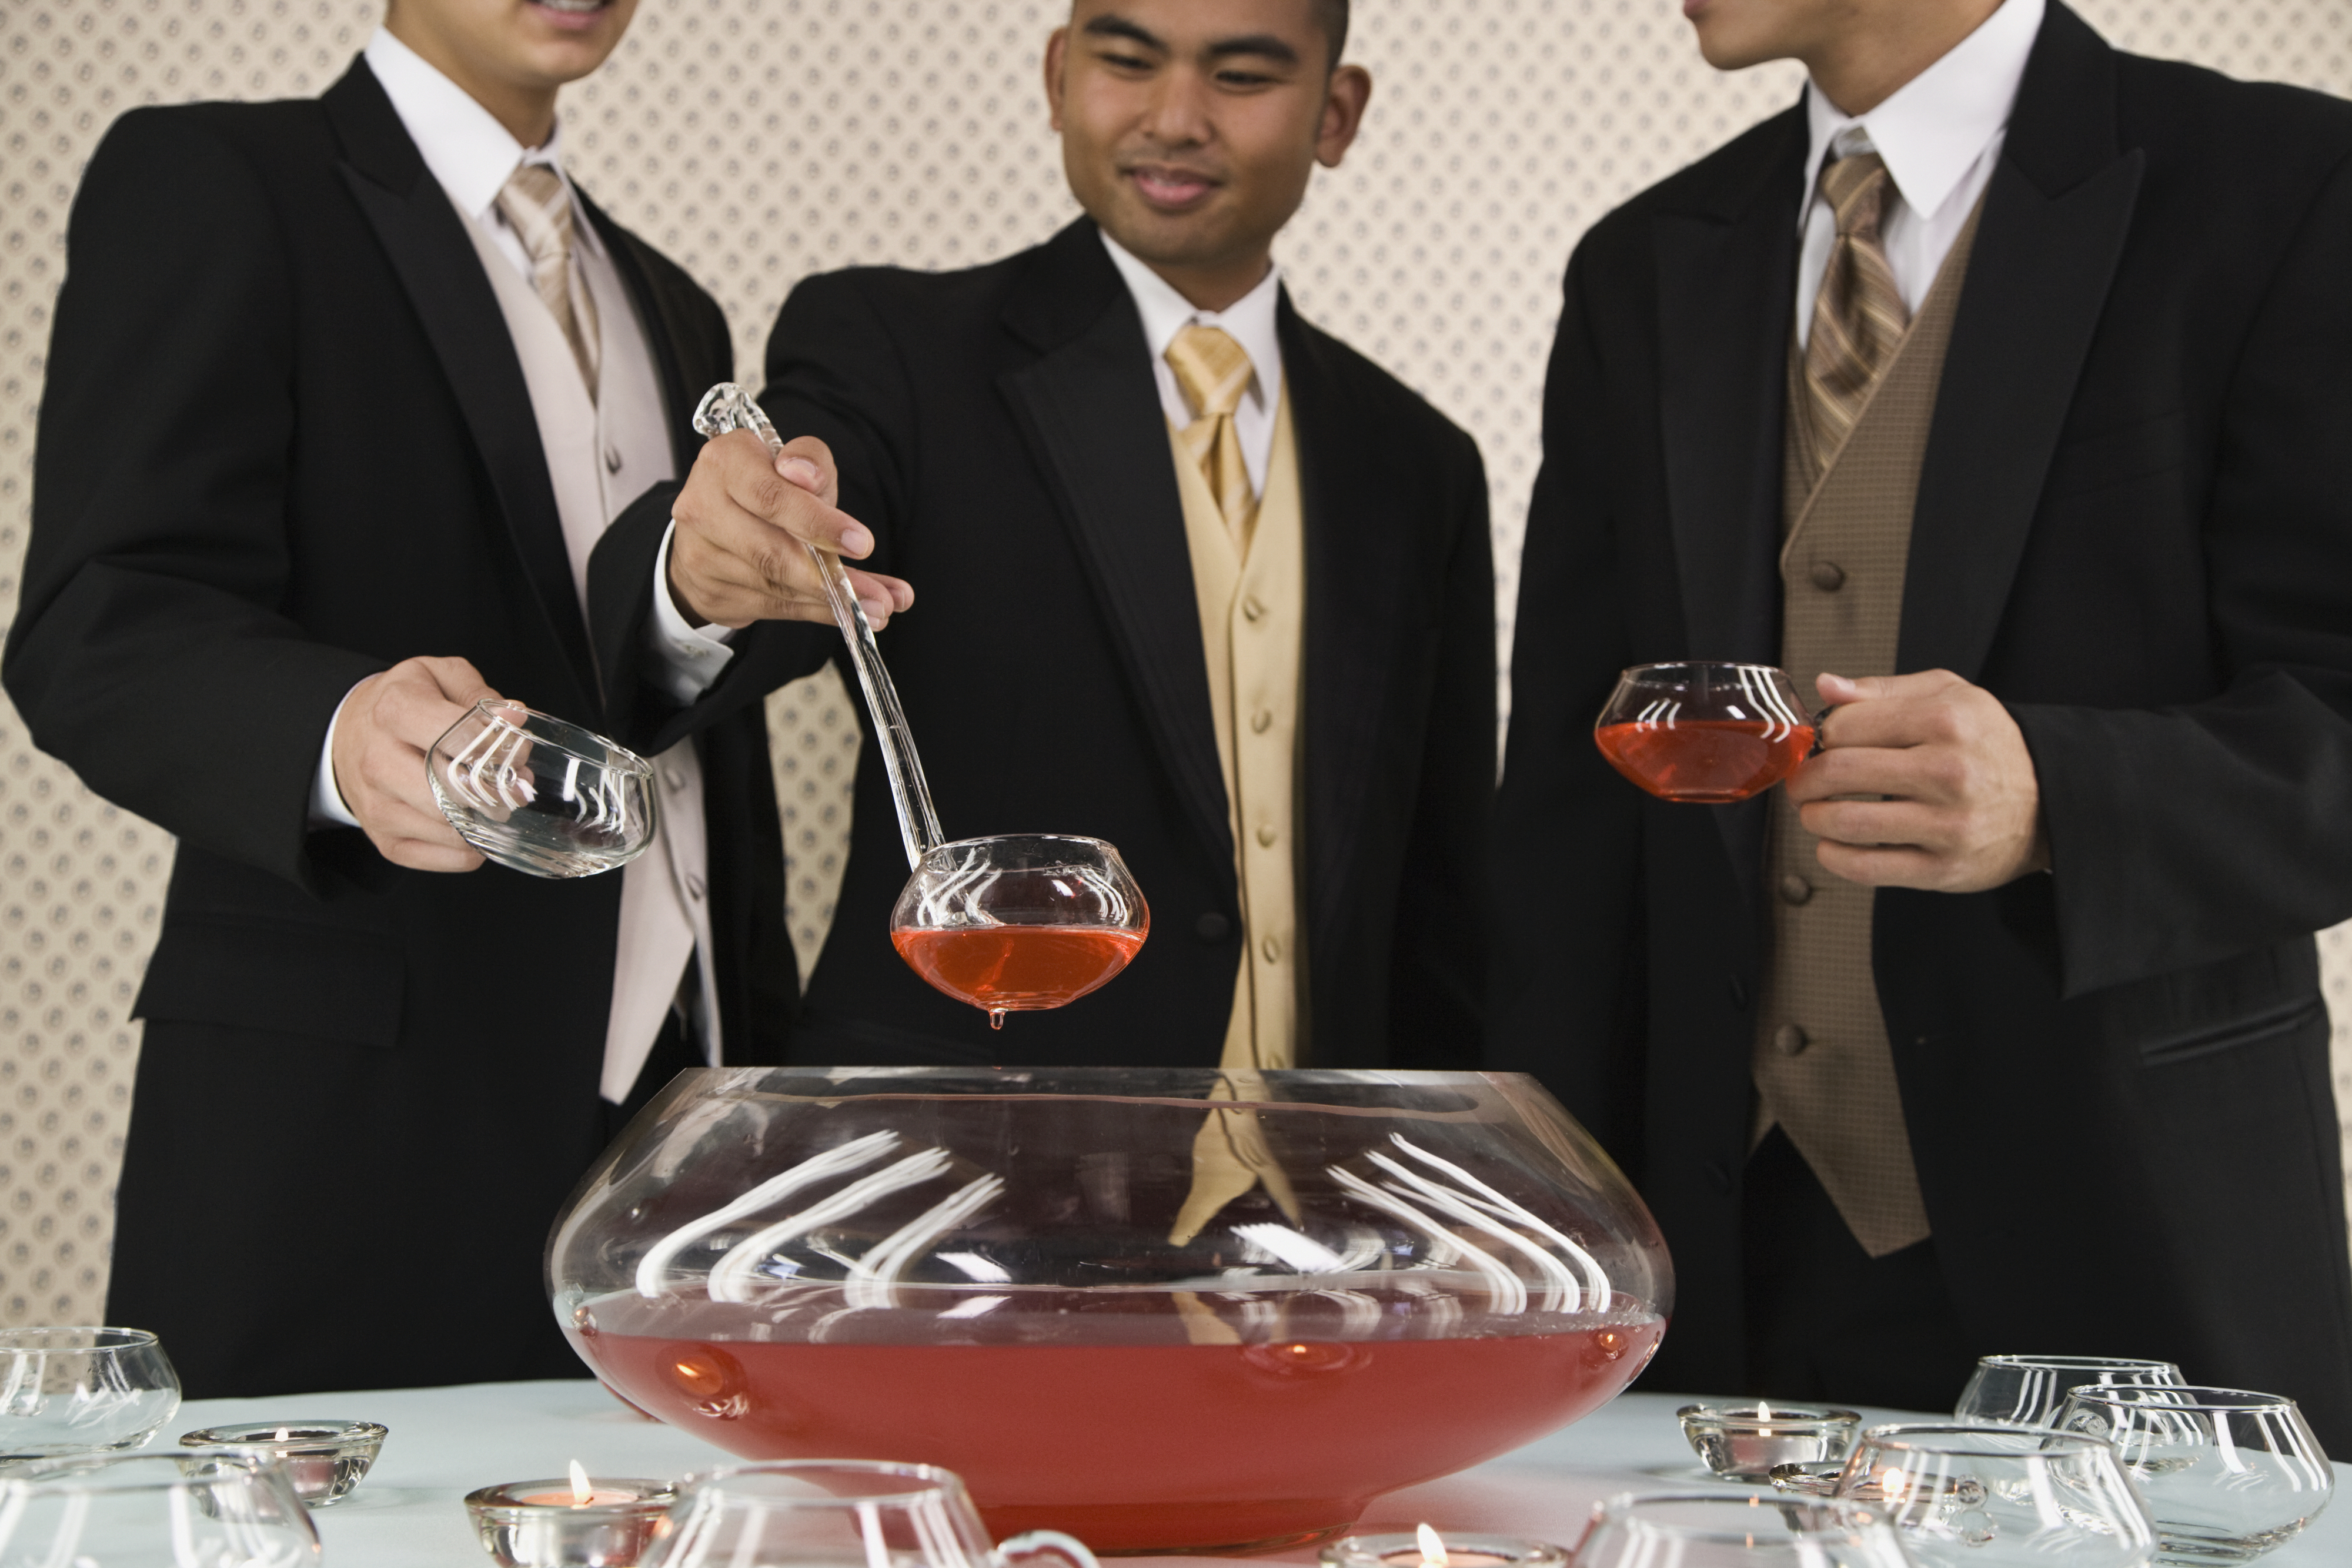 Men in suits around a punch bowl